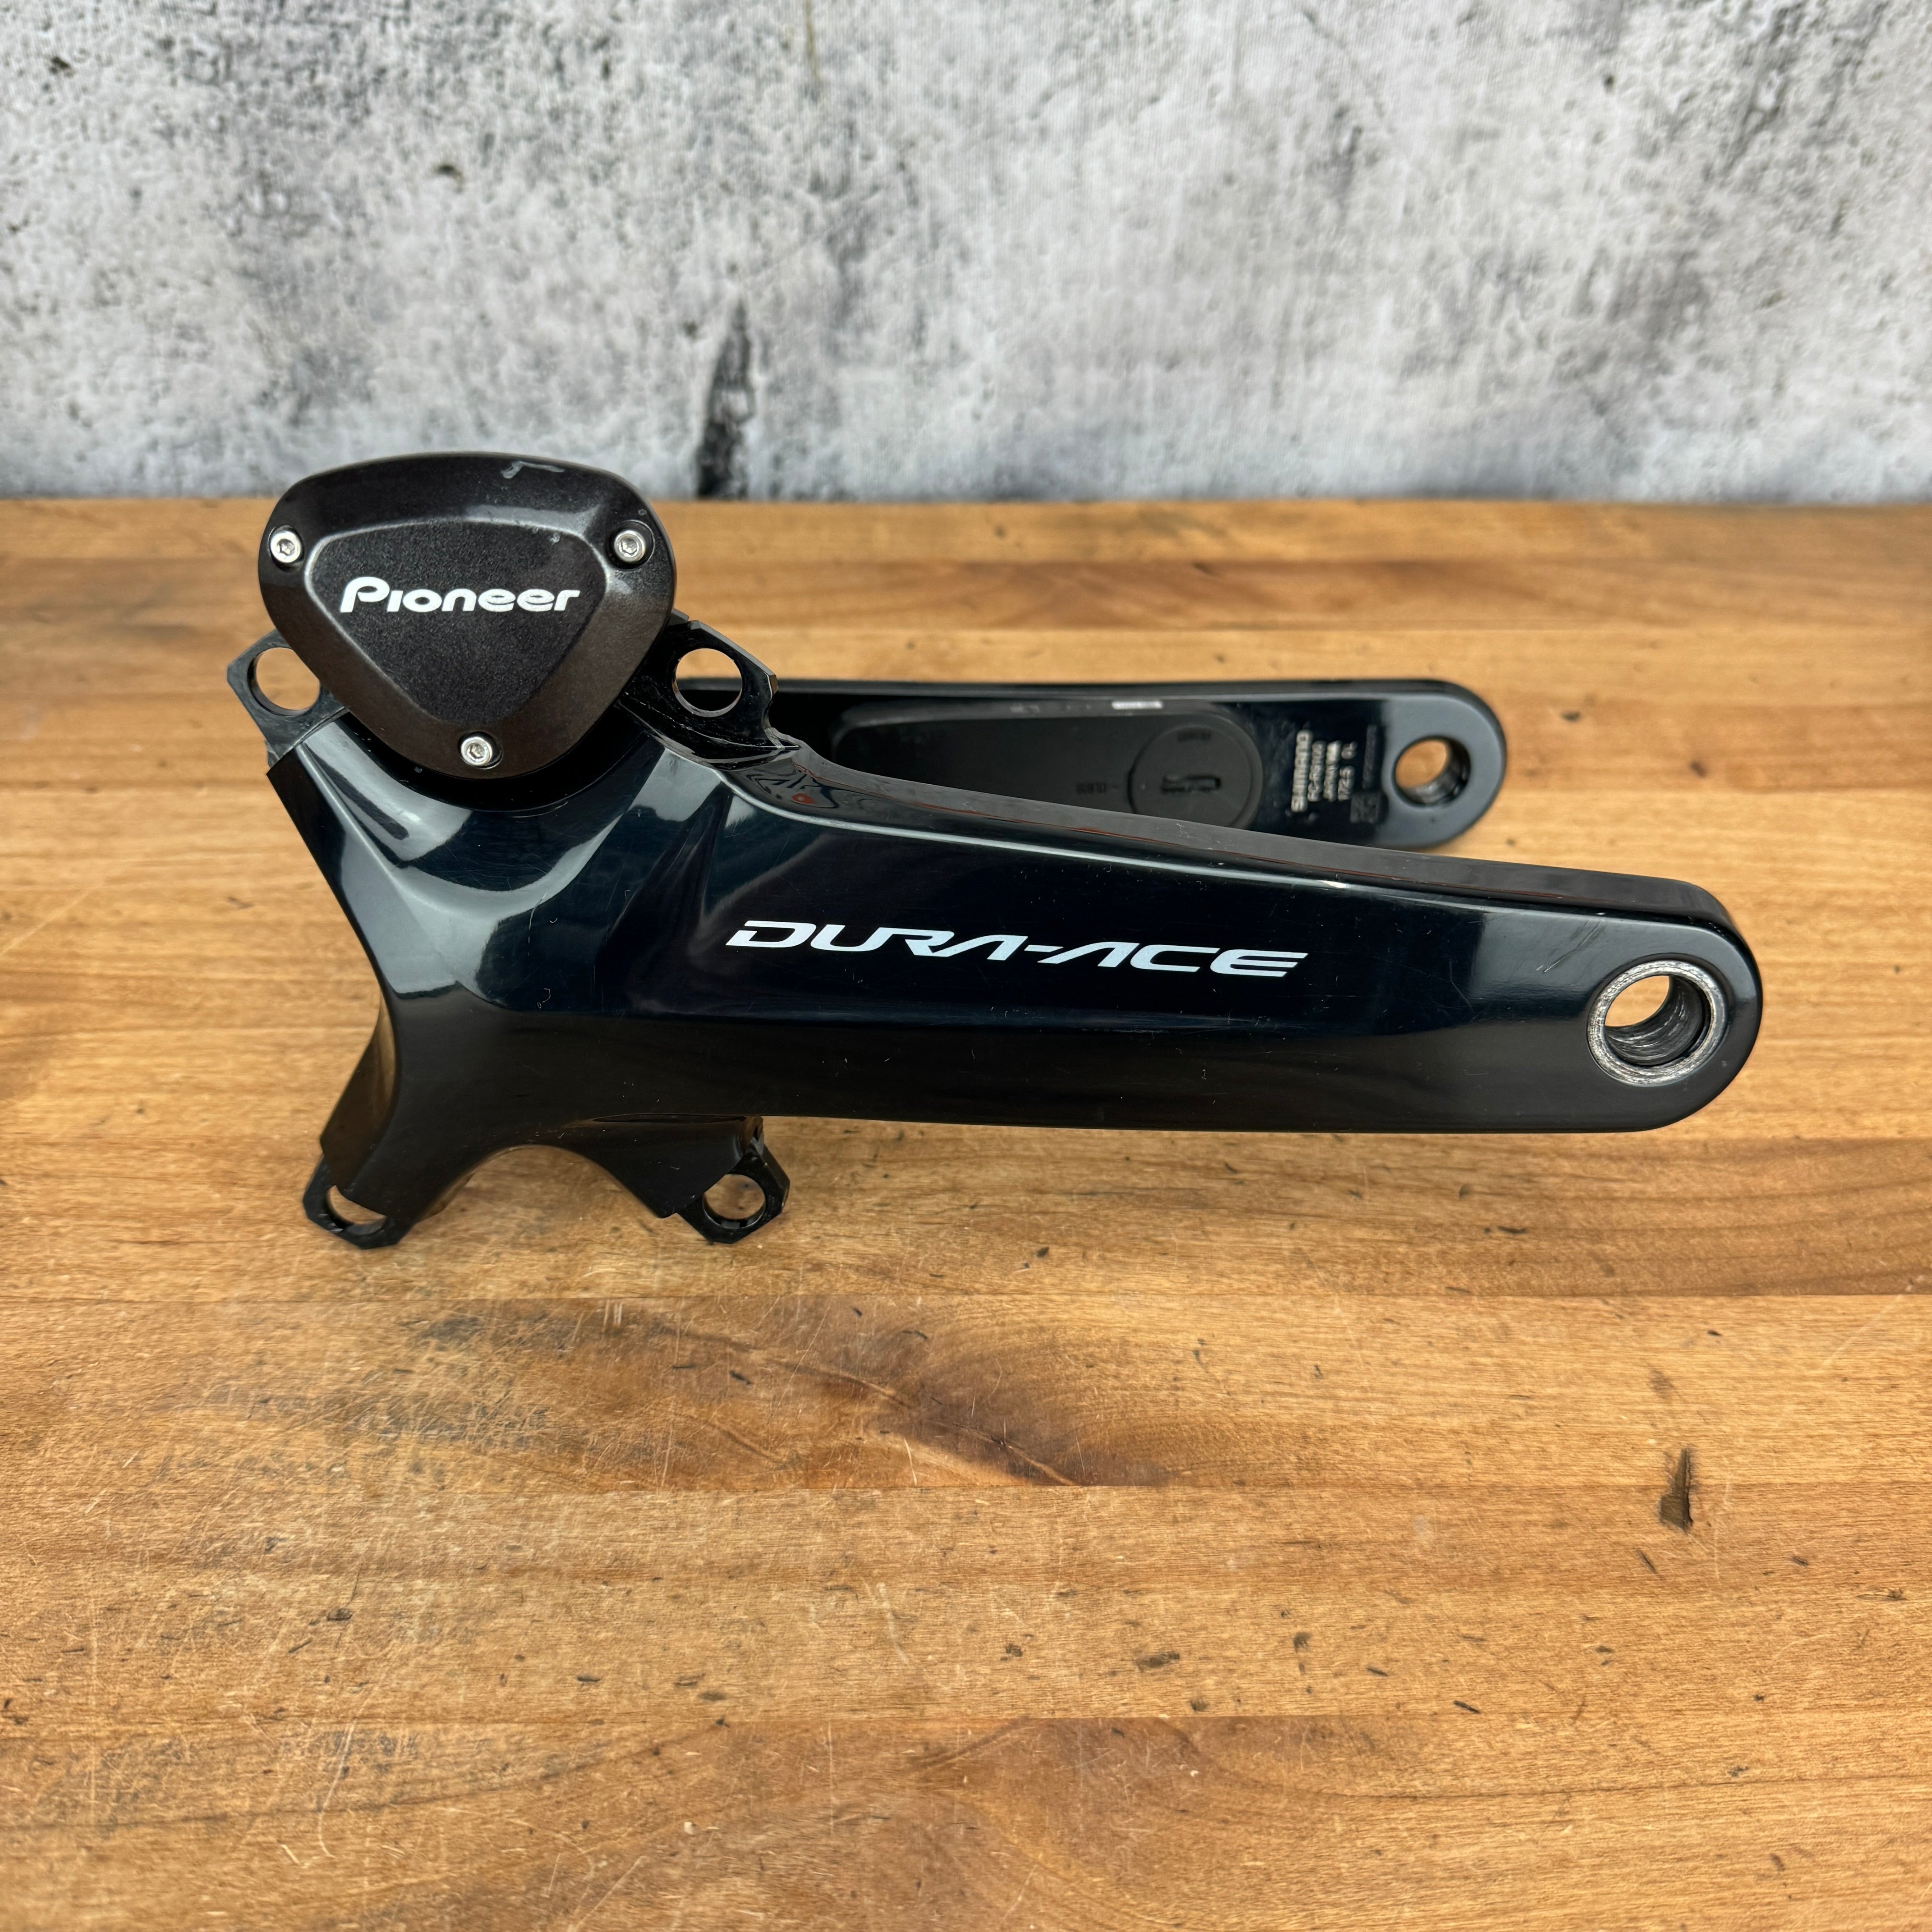 Pioneer SBT-PM91 Dura-Ace FC-R9100 172.5mm Power Meter Crank Arms Passed  Recall